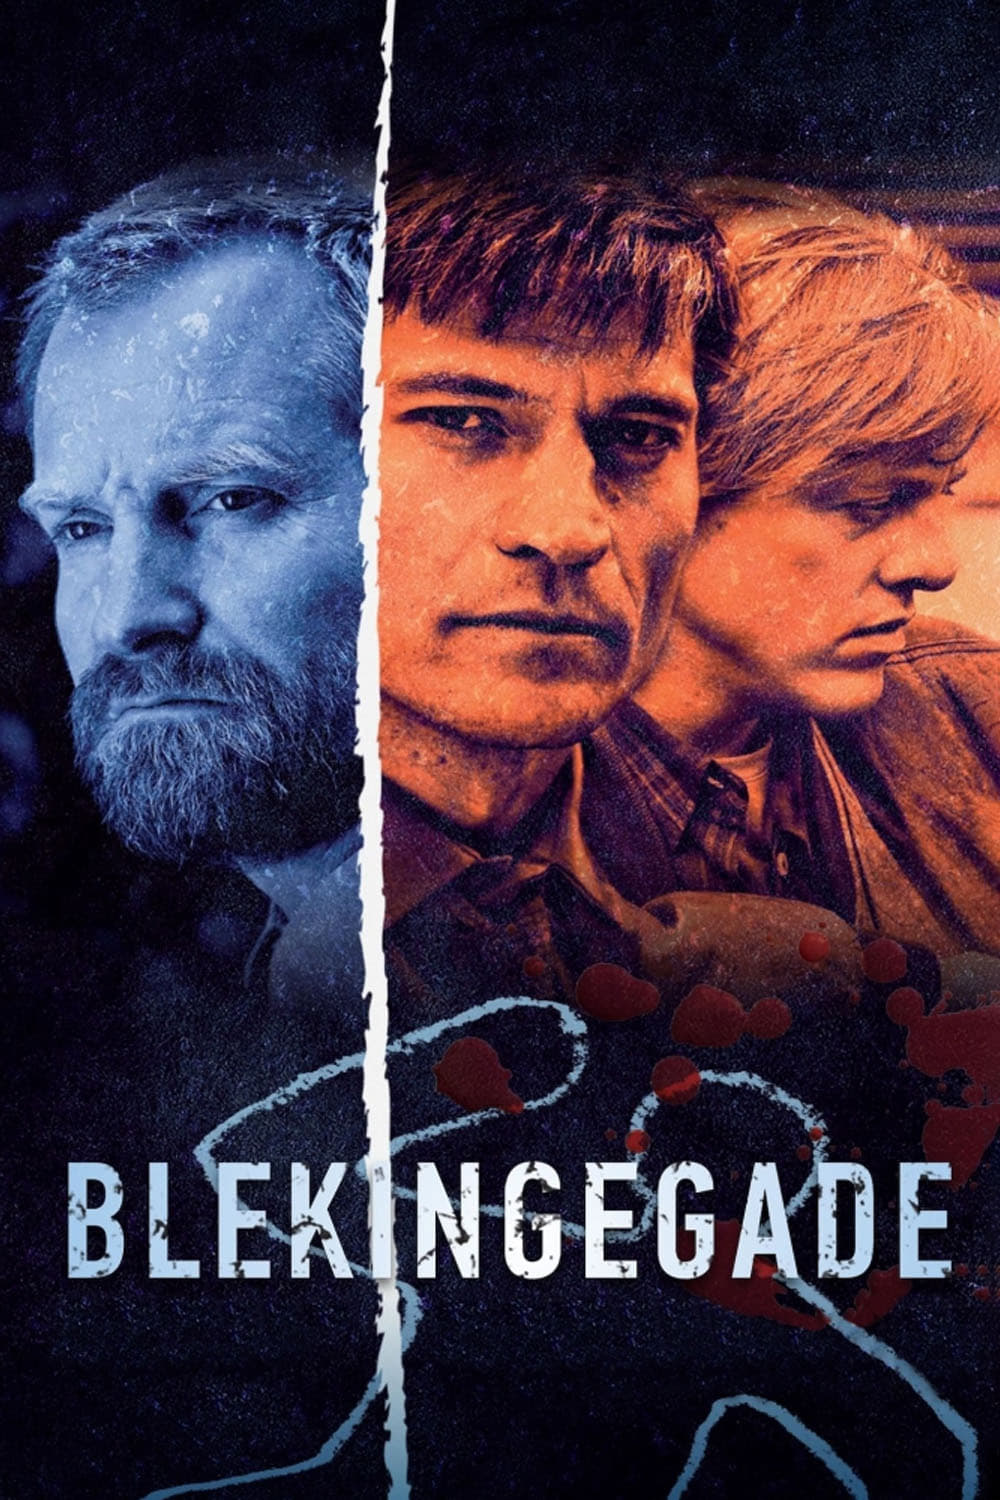 Blekingegade TV Shows About Robbery